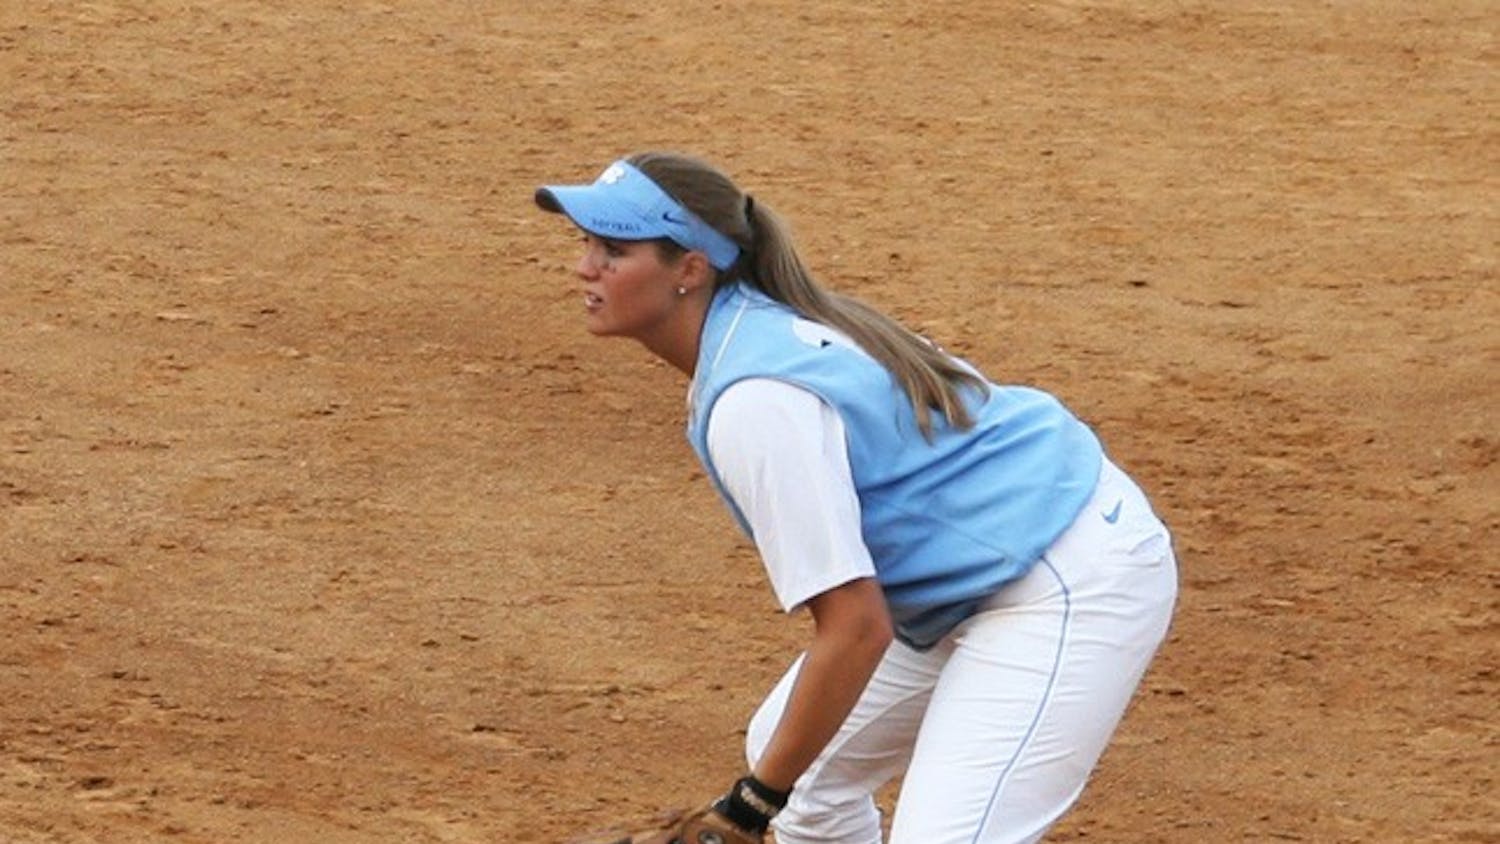 Senior first baseman Stephanie Murad exploded for two home runs in North Carolina’s 6-2 victory against Appalachian State.